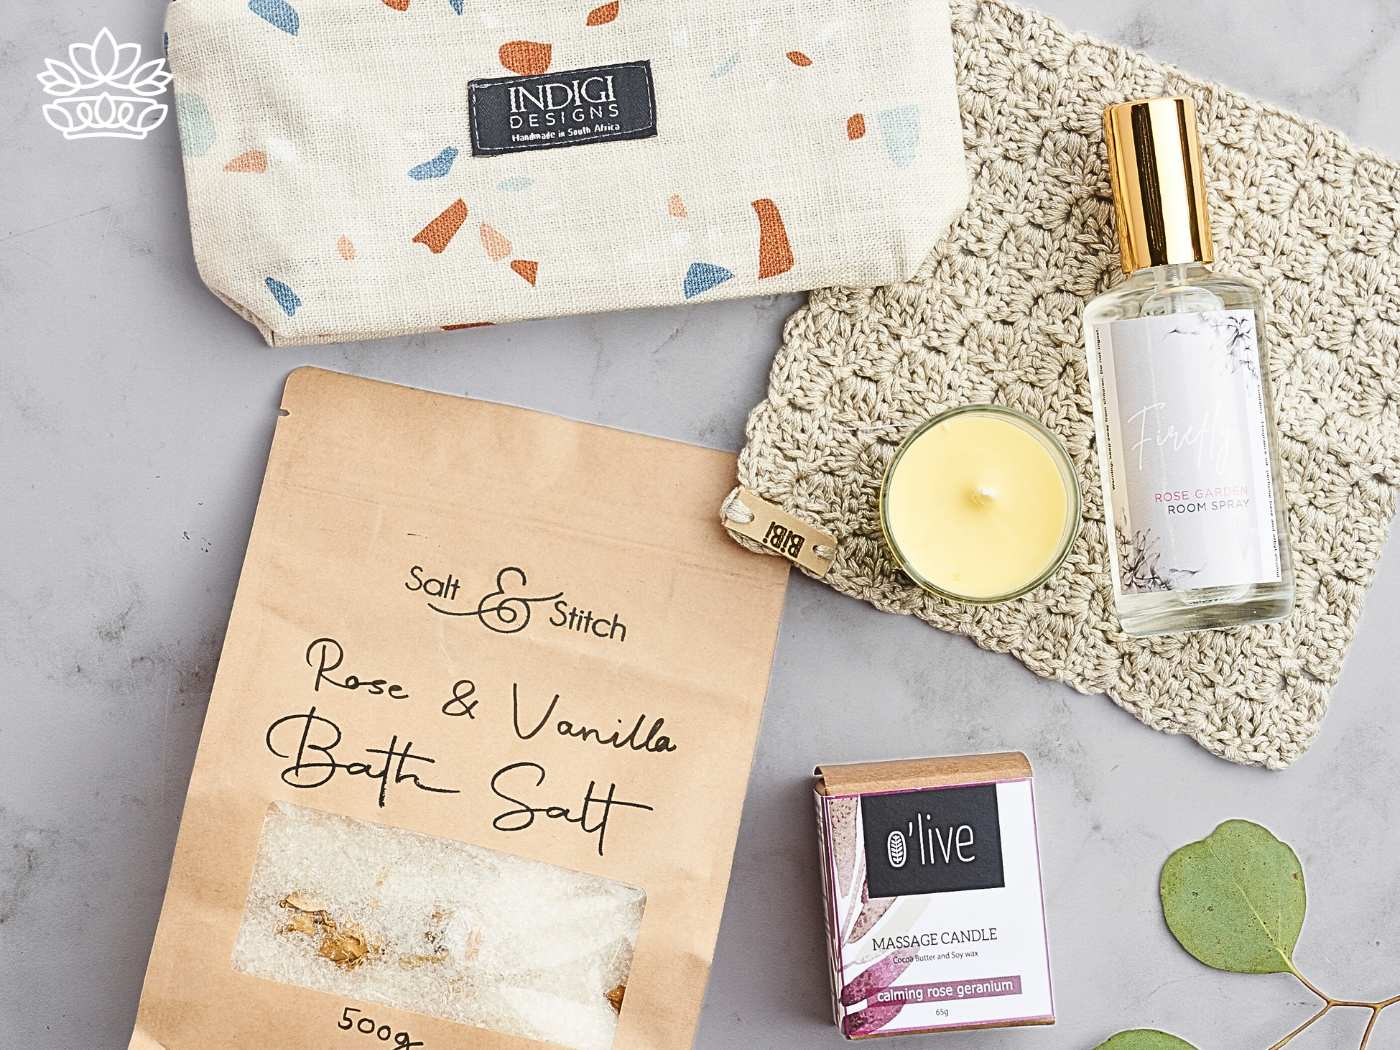 An assortment of spa products laid out on a textured surface, featuring rose and vanilla bath salts, a soothing massage candle, a small lit candle, and an elegant room spray bottle. These indulgent items are elegantly presented, making them ideal gifts from Fabulous Flowers and Gifts. Gift Boxes for wife. Delivered with Heart.